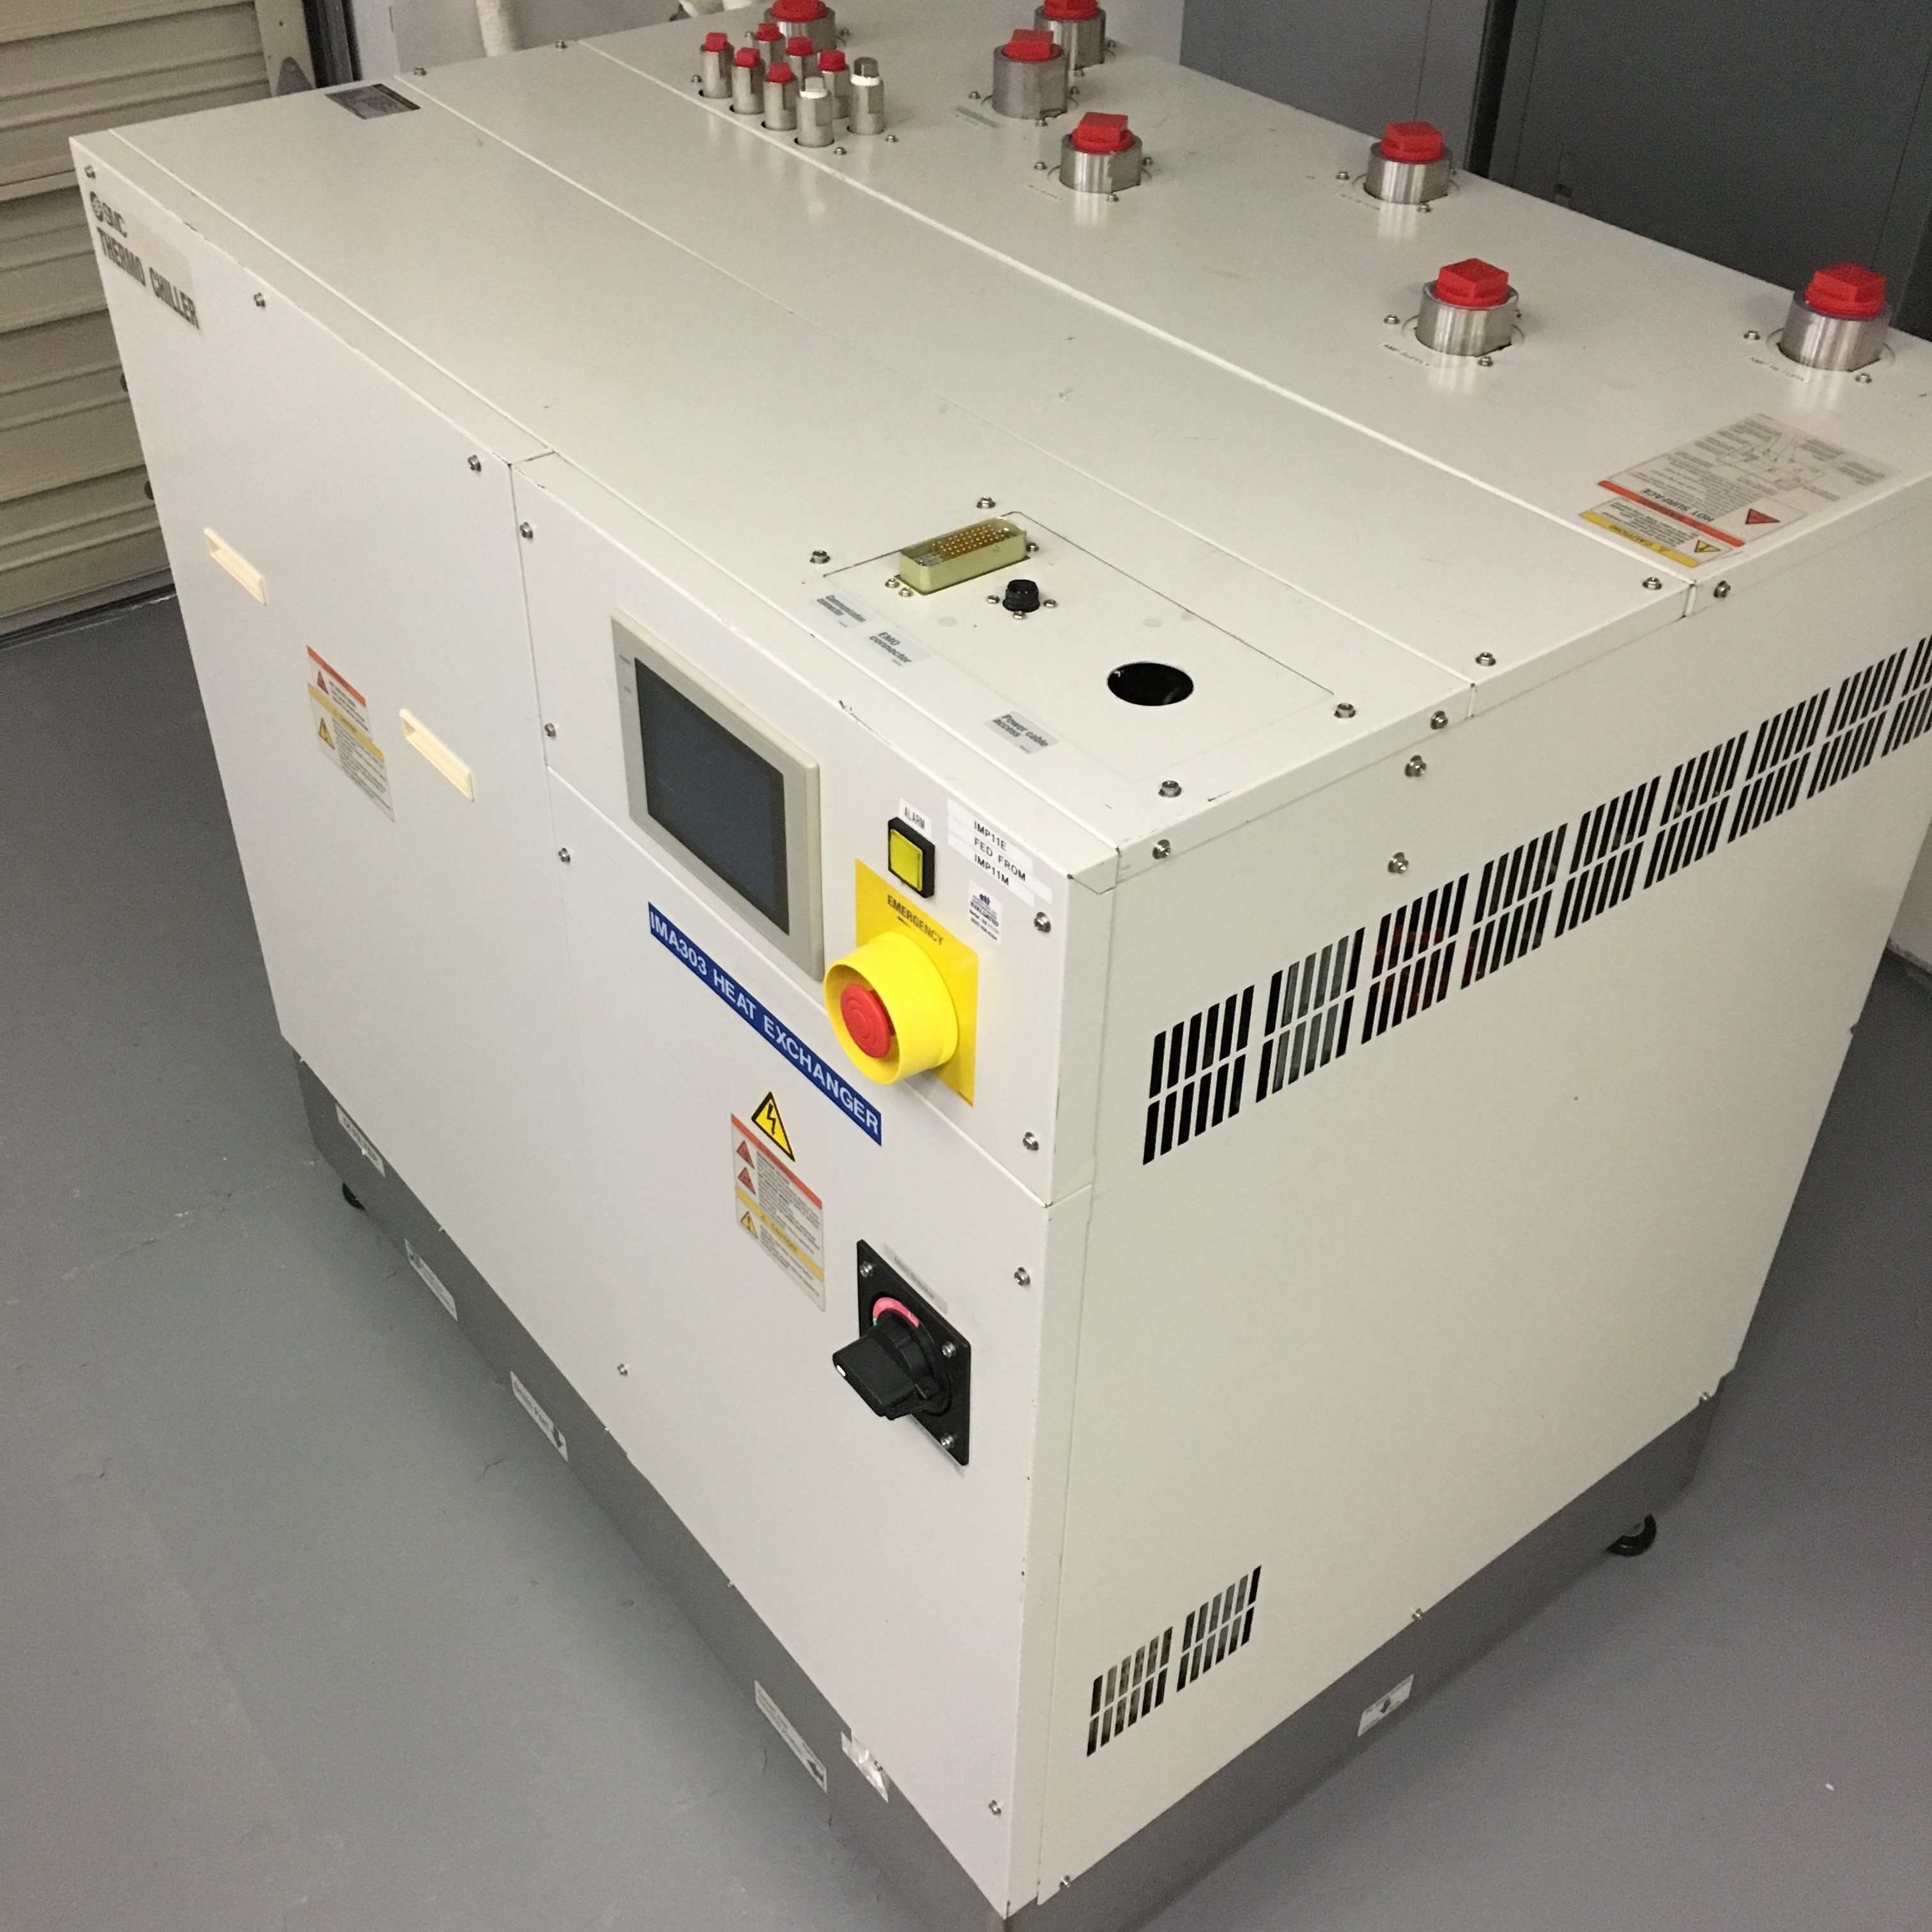 INR-498-007B | SMC Thermo Chiller